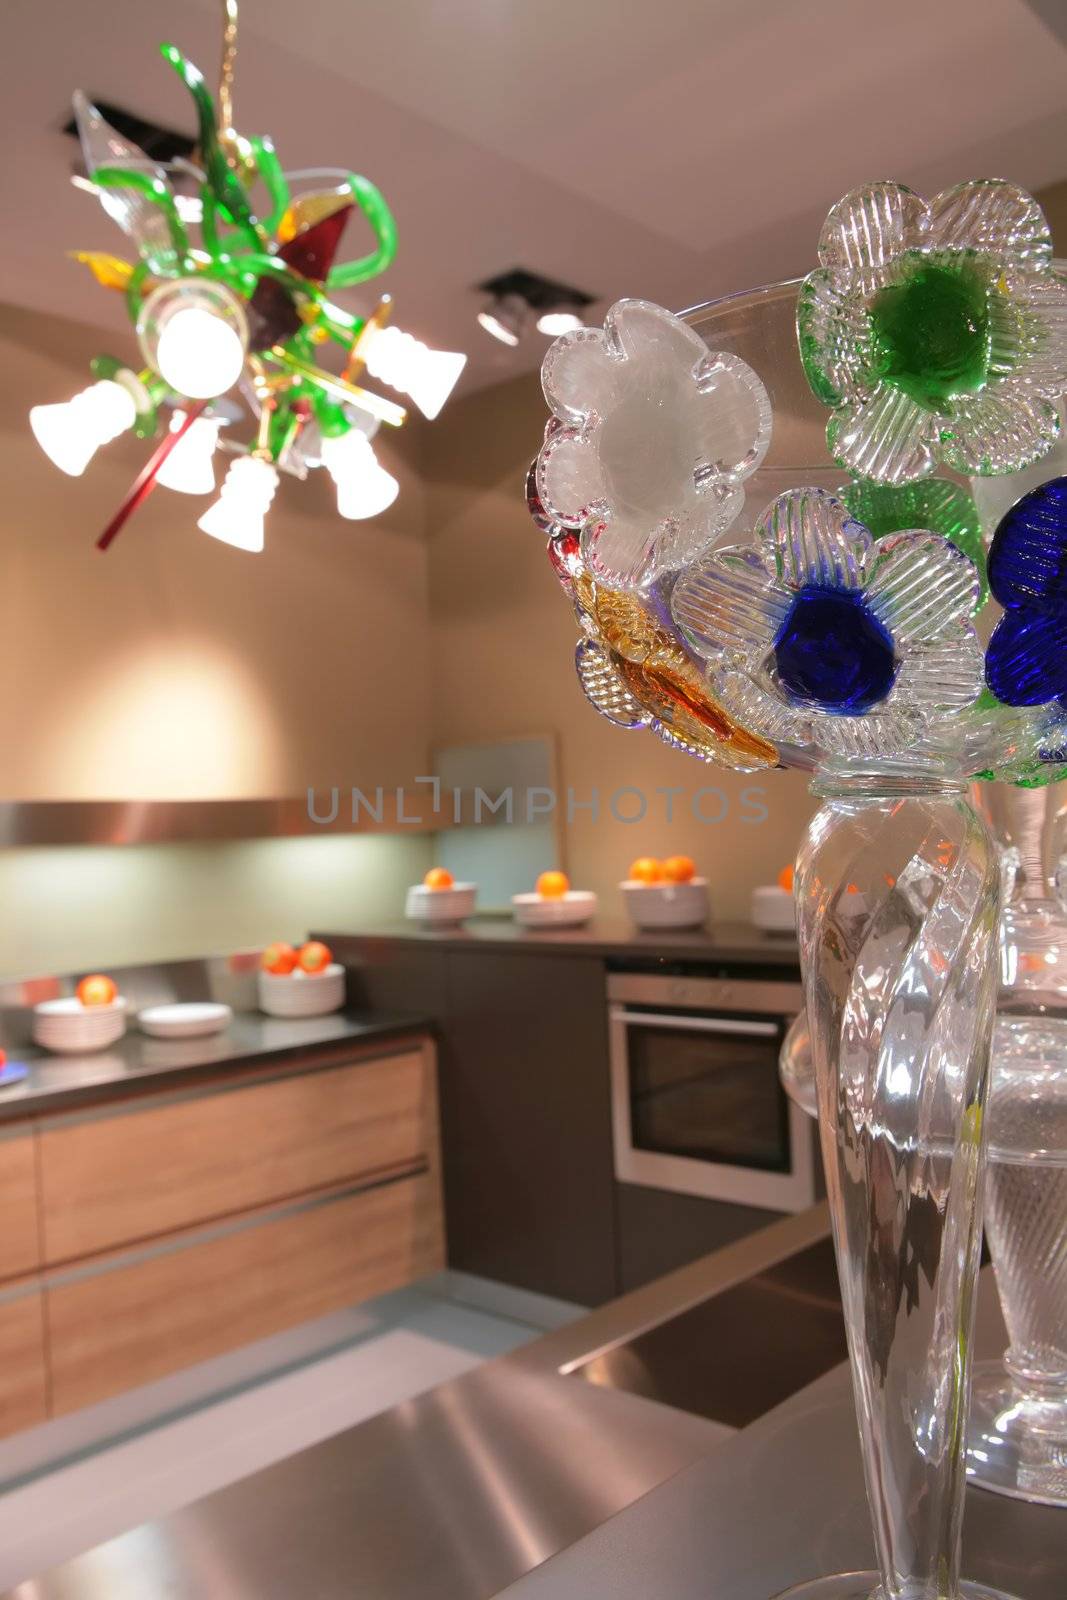 vase with glass flowers in interior of the modern kitchen